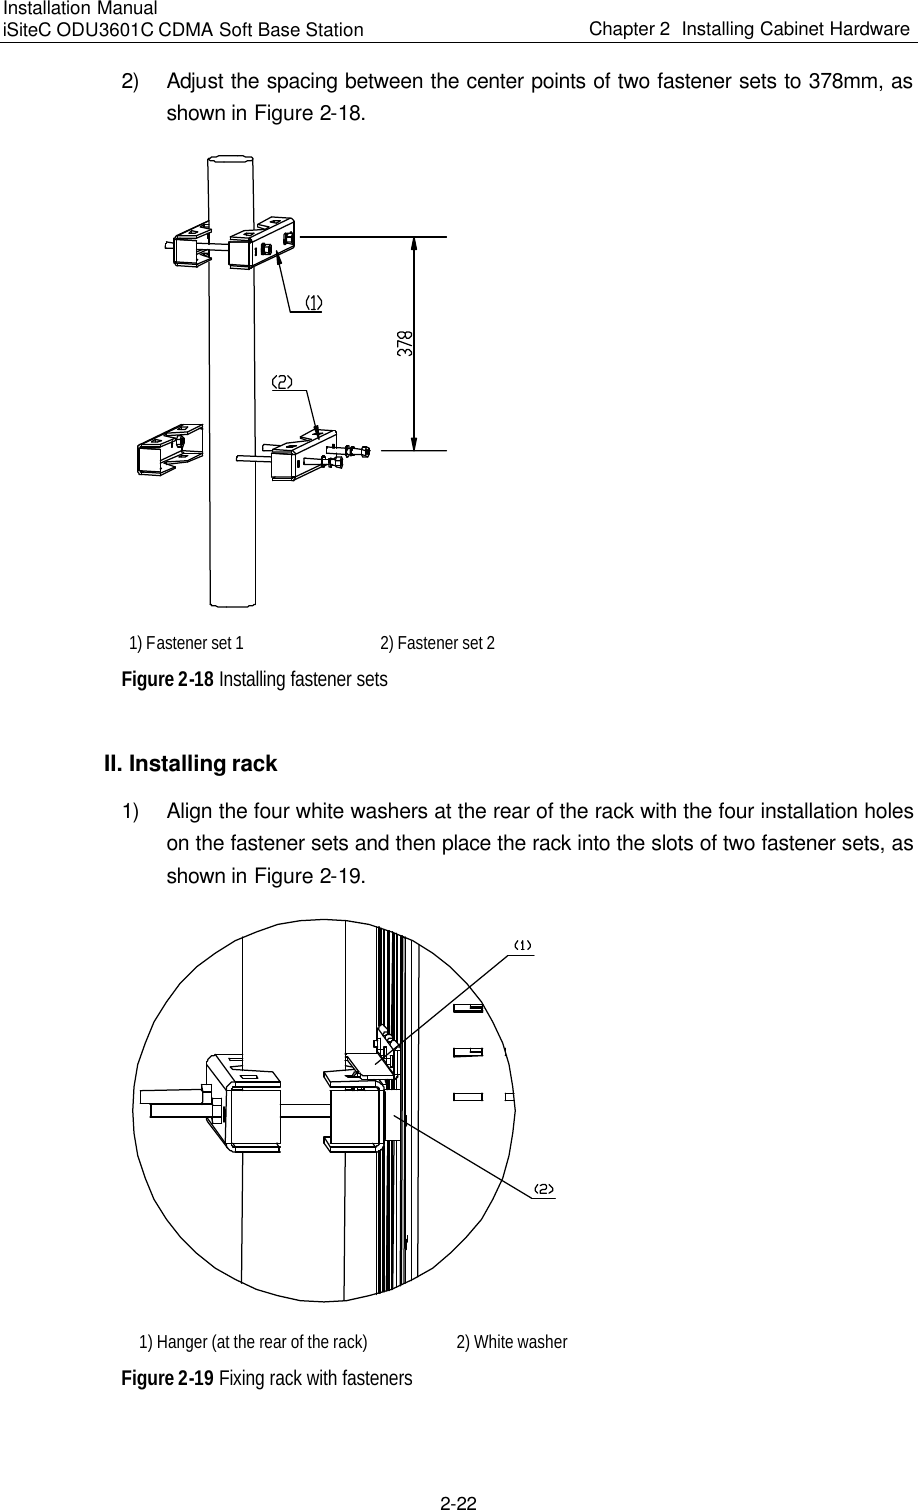 Installation Manual   iSiteC ODU3601C CDMA Soft Base Station Chapter 2  Installing Cabinet Hardware  2-22 2) Adjust the spacing between the center points of two fastener sets to 378mm, as shown in Figure 2-18.   1) Fastener set 1  2) Fastener set 2 Figure 2-18 Installing fastener sets II. Installing rack 1) Align the four white washers at the rear of the rack with the four installation holes on the fastener sets and then place the rack into the slots of two fastener sets, as shown in Figure 2-19.   1) Hanger (at the rear of the rack)  2) White washer Figure 2-19 Fixing rack with fasteners 